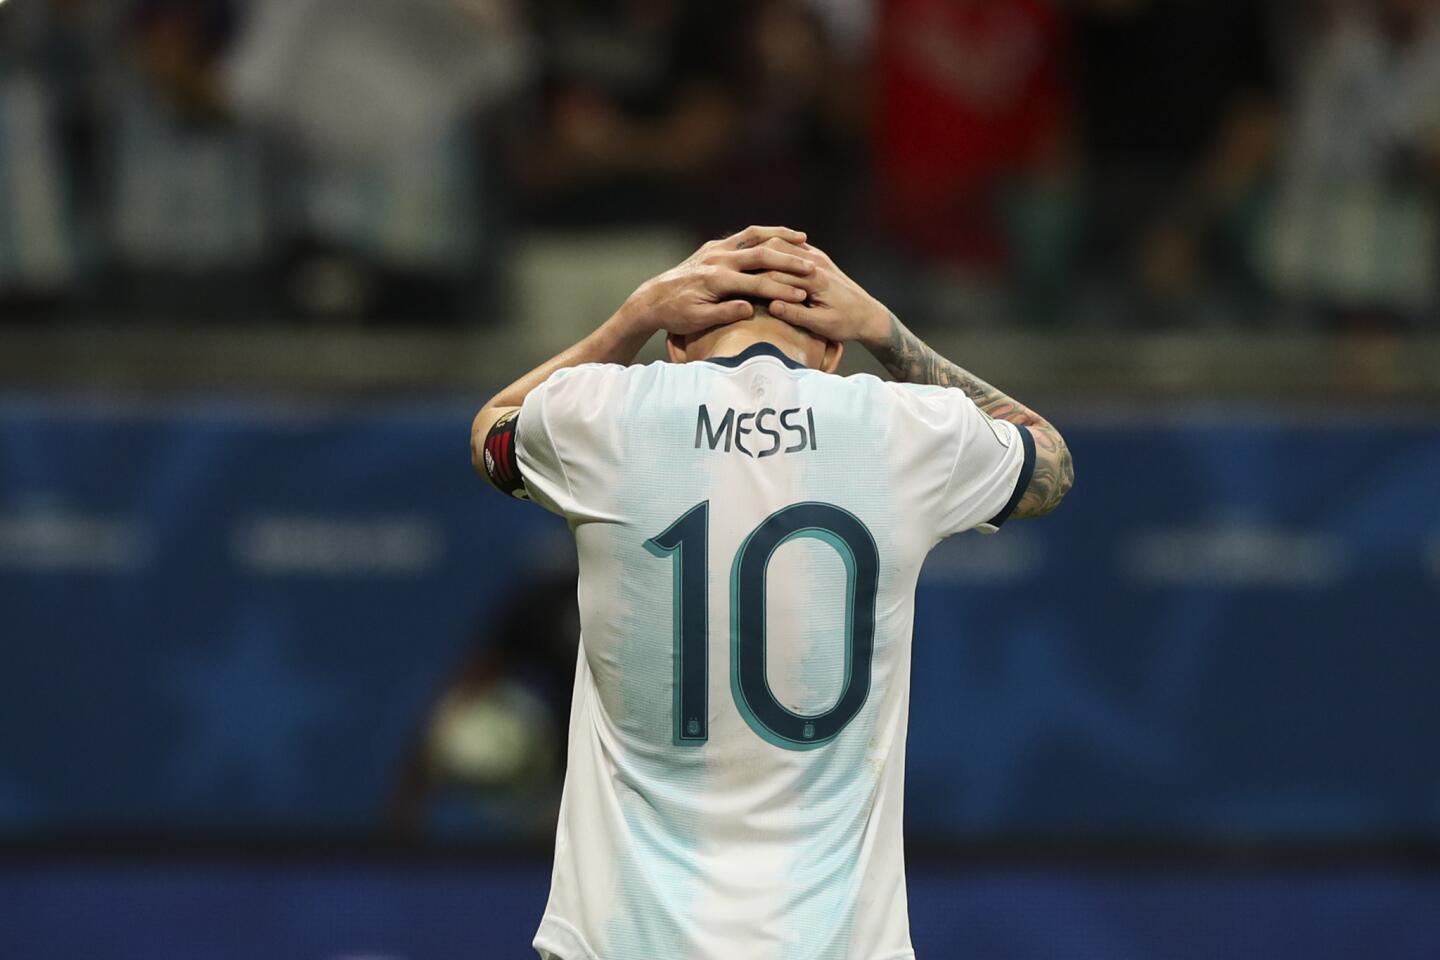 Argentina's Lionel Messi gestures after failing to score during a Copa America Group B soccer match against Colombia at the Arena Fonte Nova in Salvador, Brazil, Saturday, June 15, 2019.